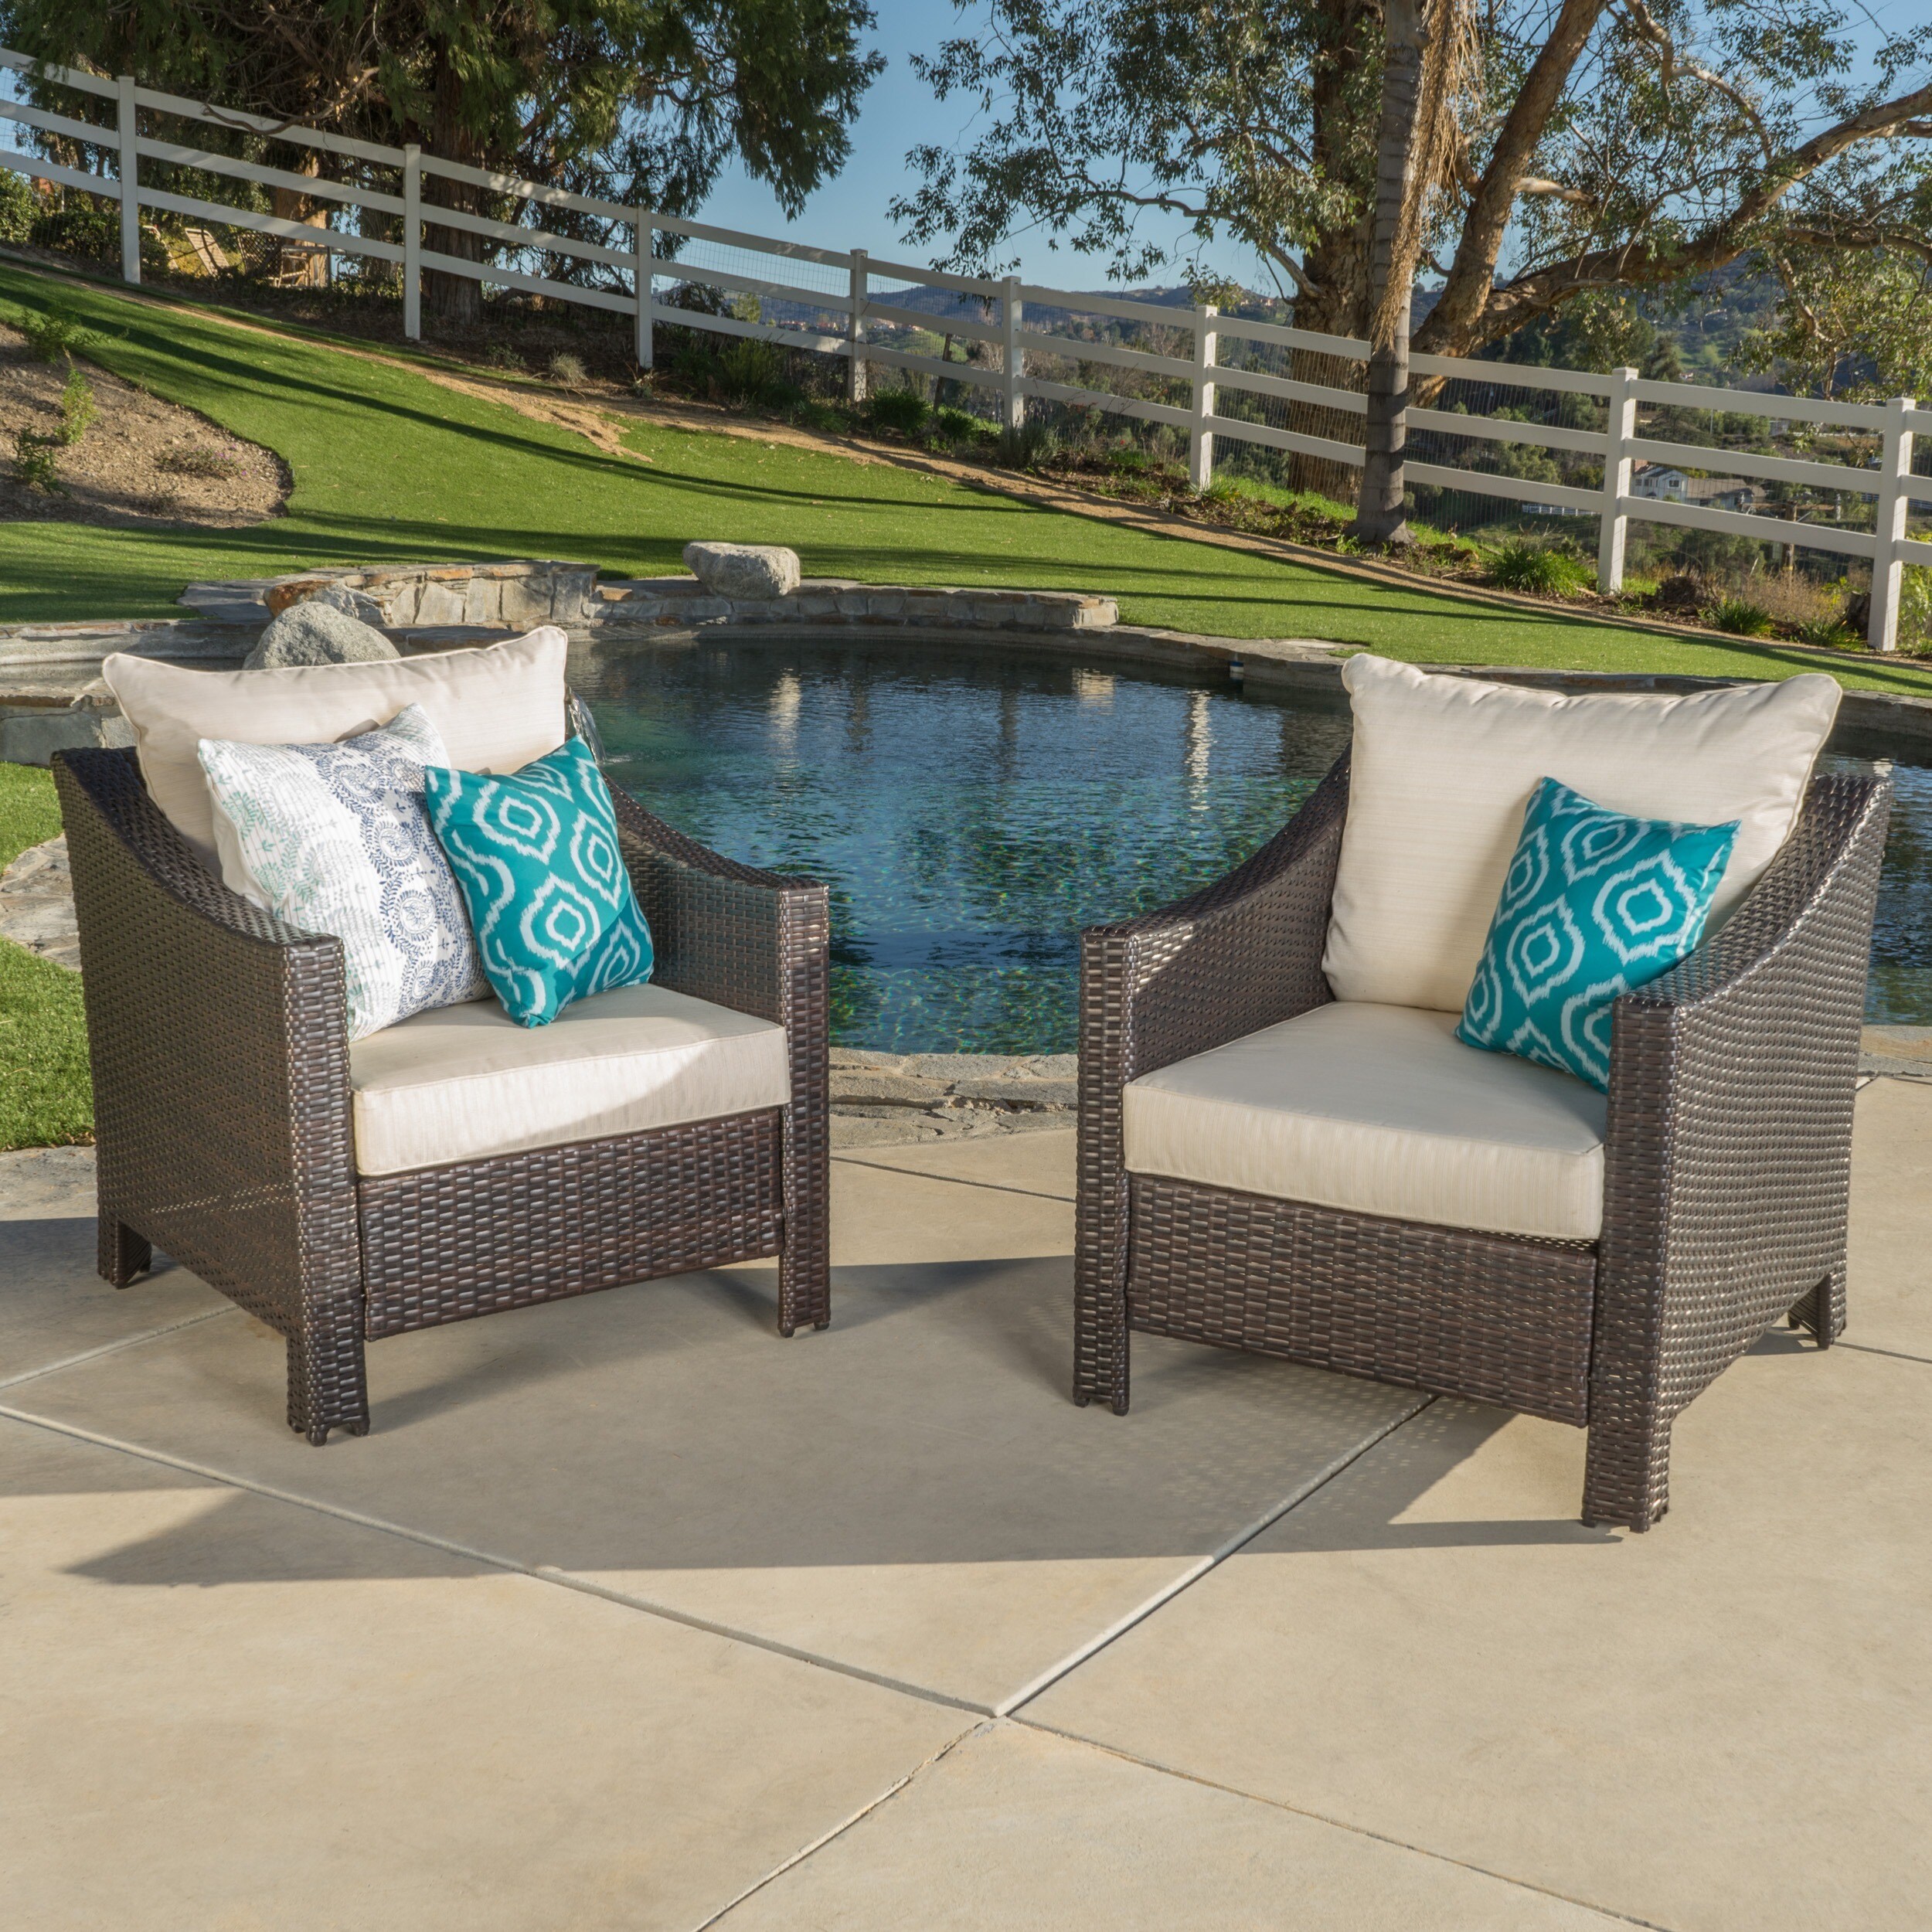 Shop Antibes Outdoor Wicker Club Chair with Cushions (Set of 2) by